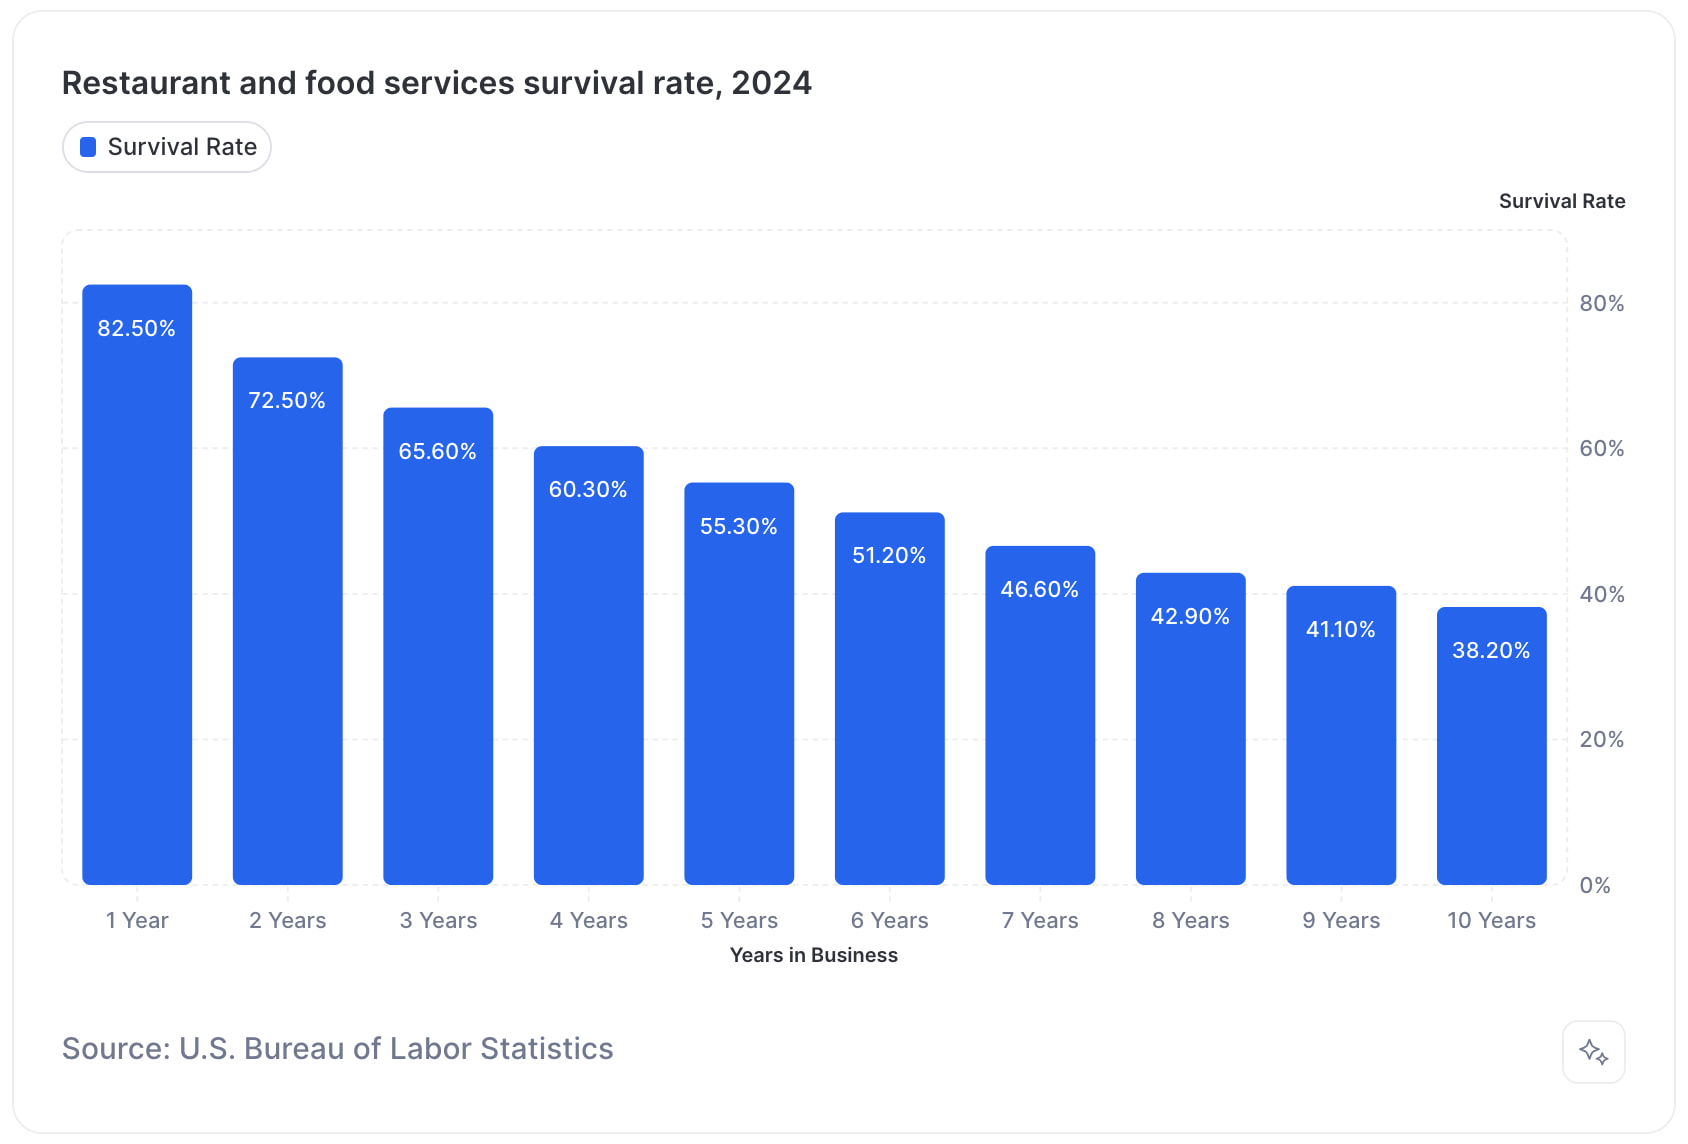 Chart showing the survival rate of restaurants